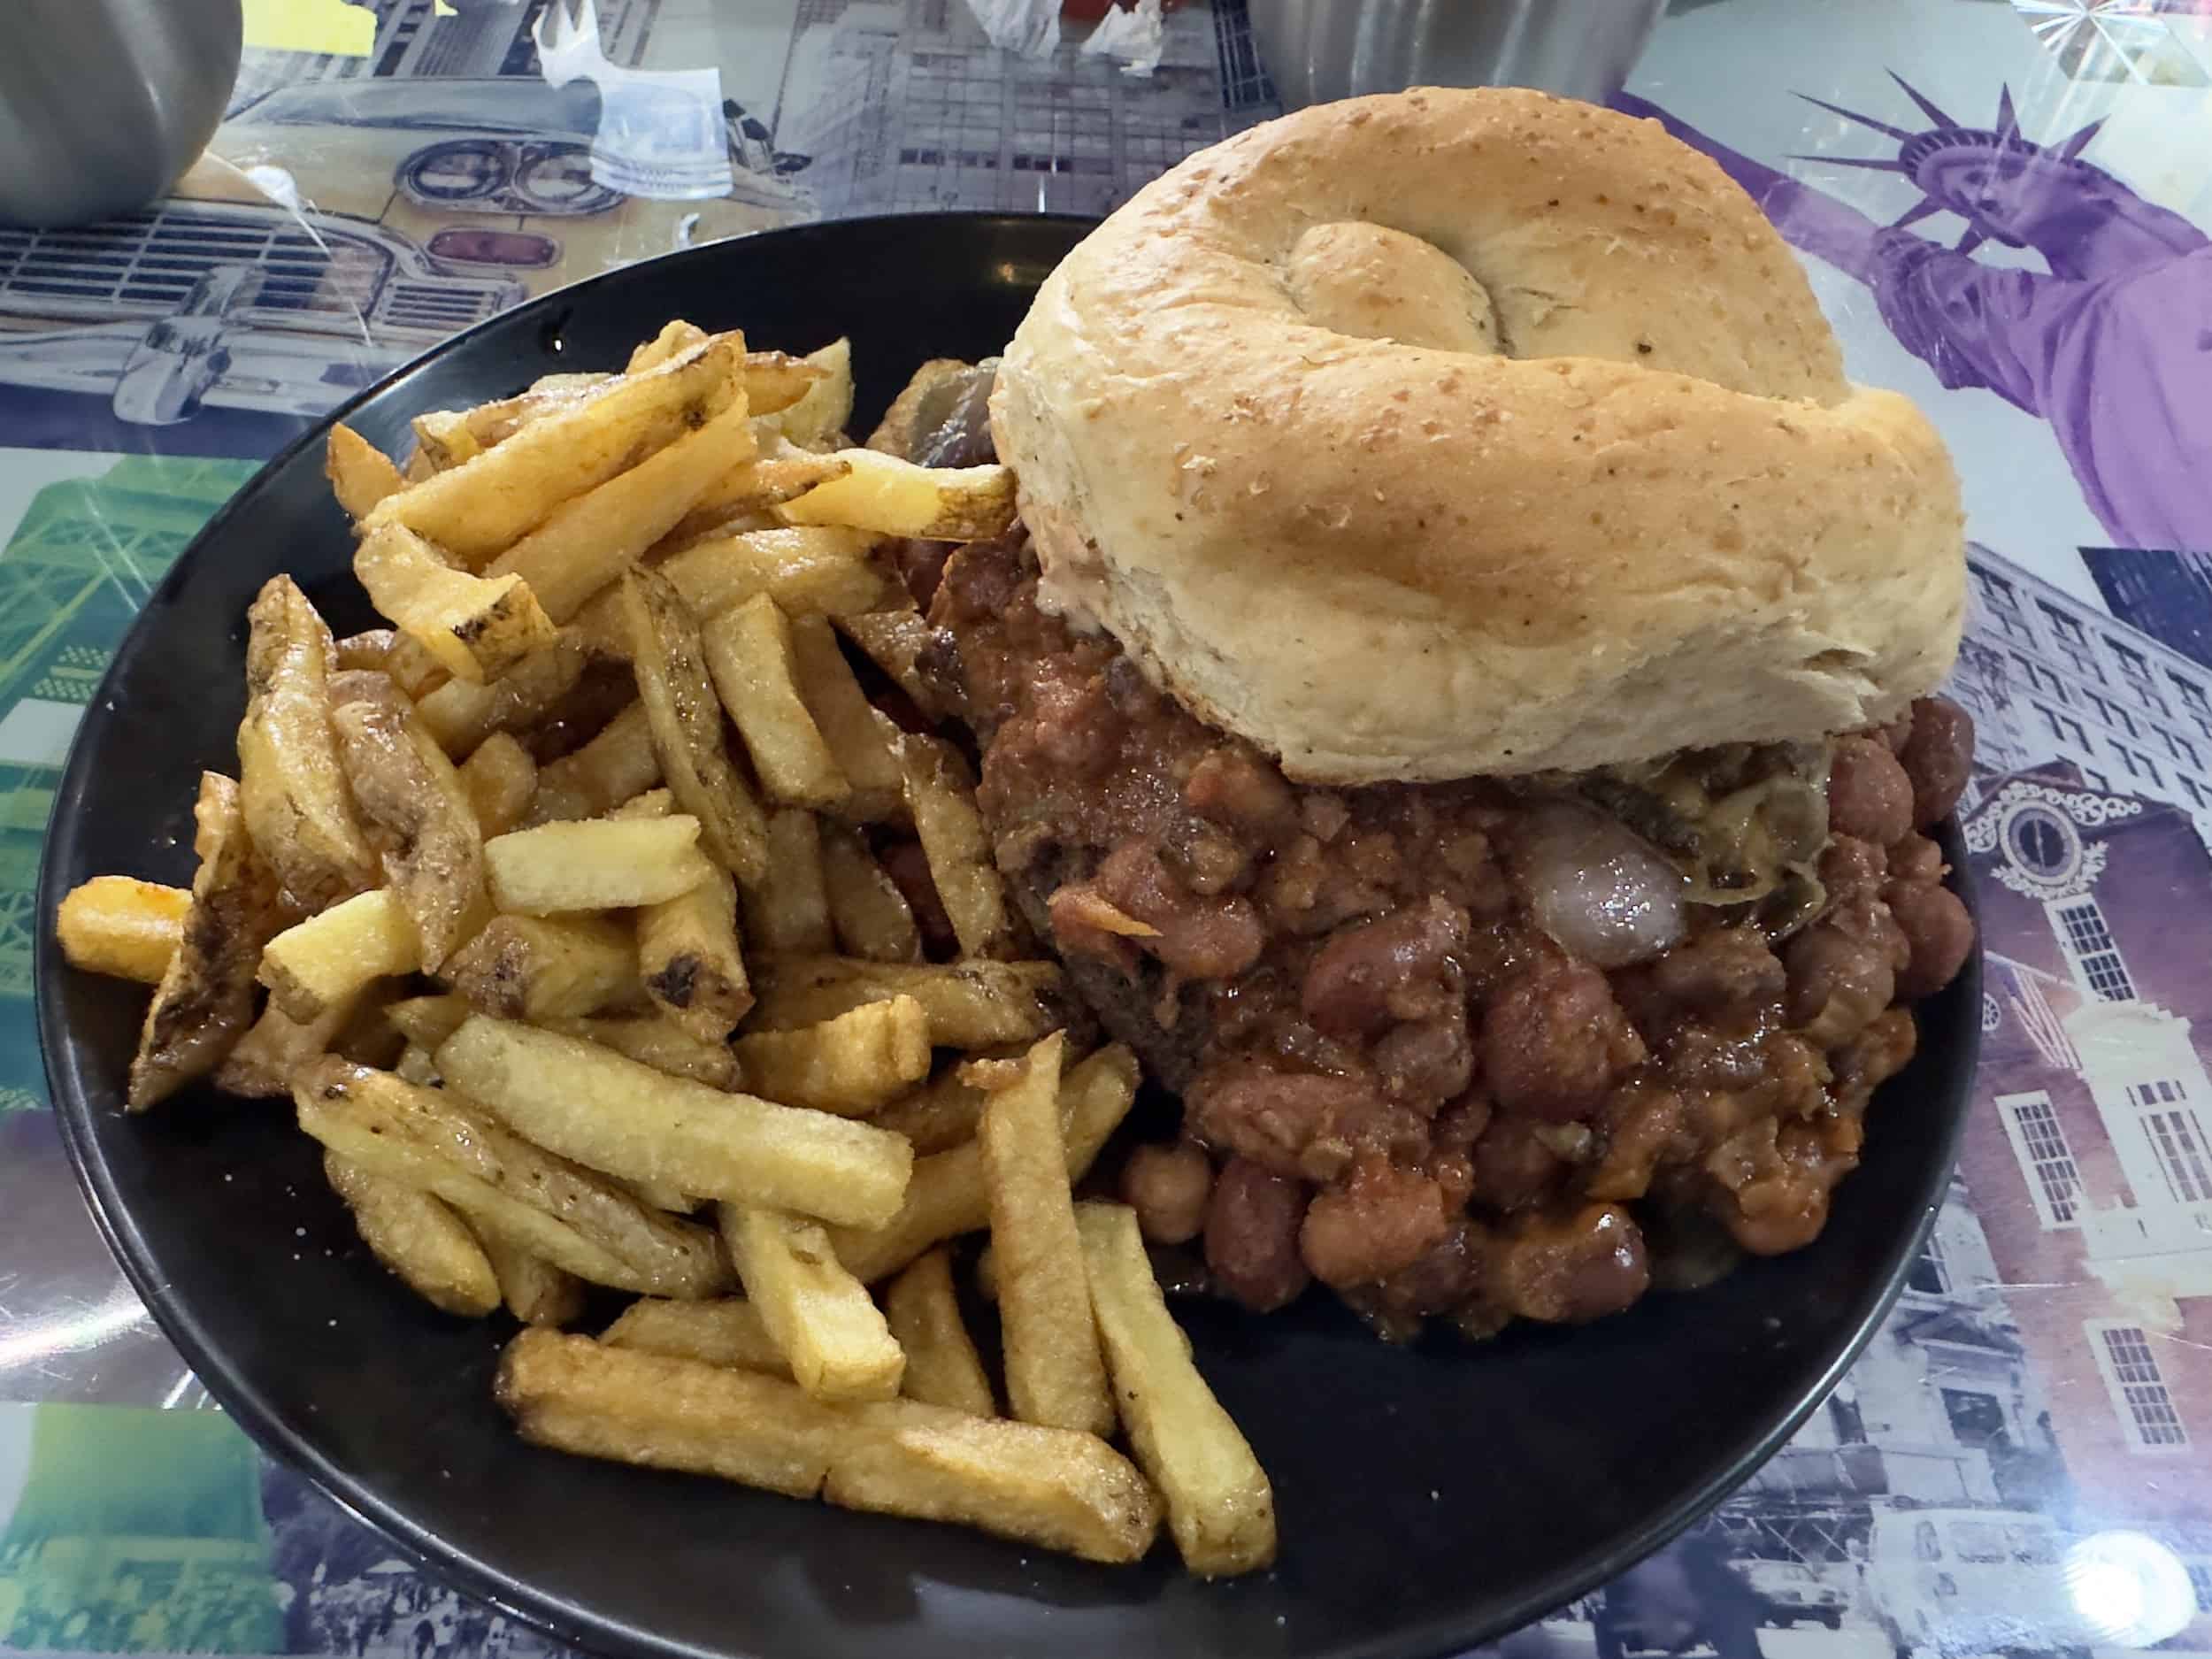 Mountain high chili burger (sautéed onions, mushrooms, melted cheddar and mozzarella, and chili con carne) at Brunch de Salento in Salento, Quindío, Colombia